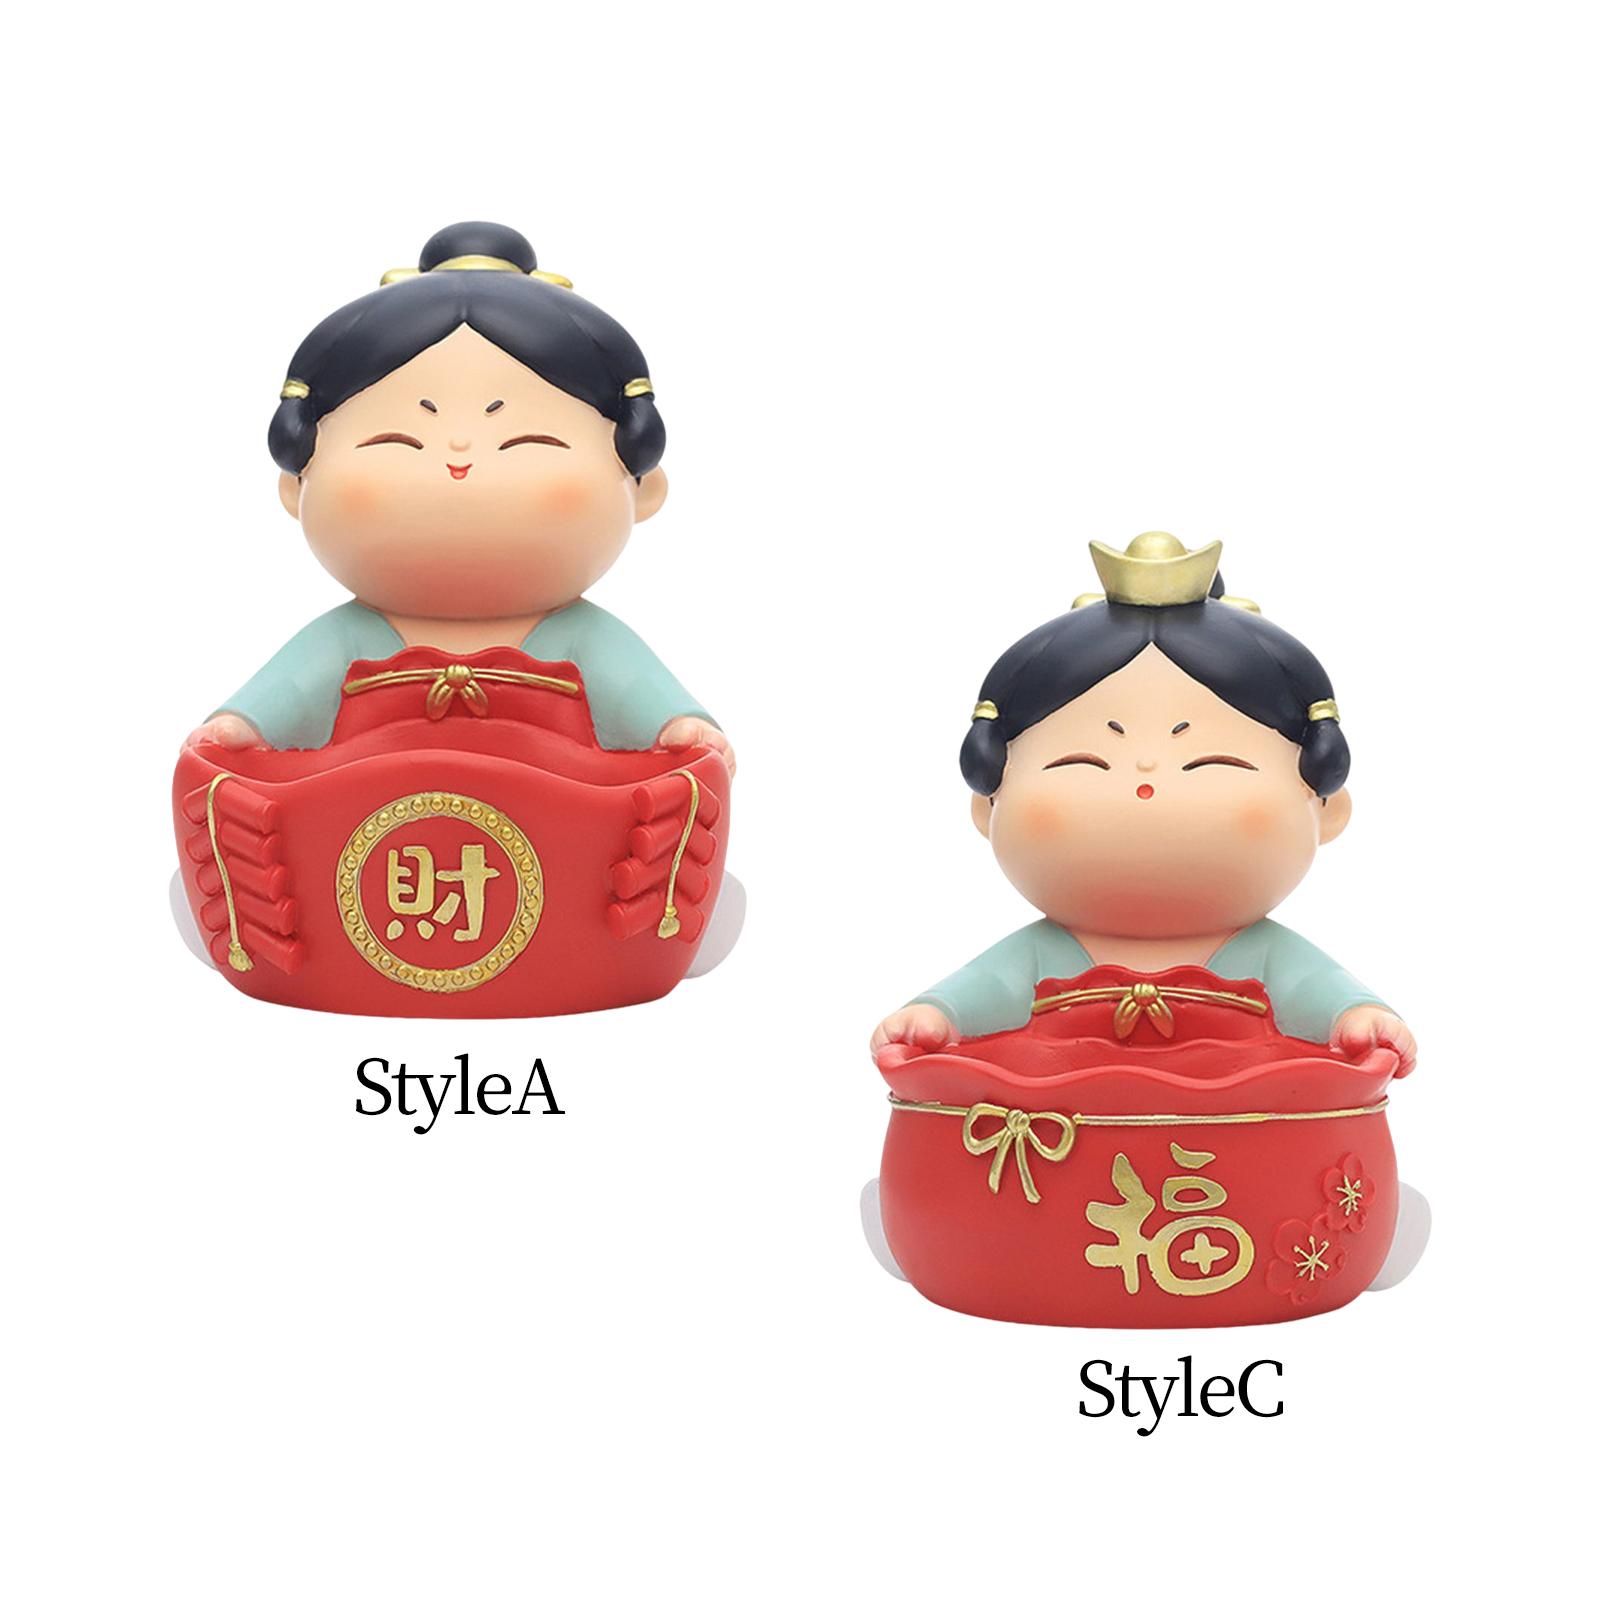 Storage Tray Maid Statue Collectible Crafts Girl Figurine for Decoration StyleA